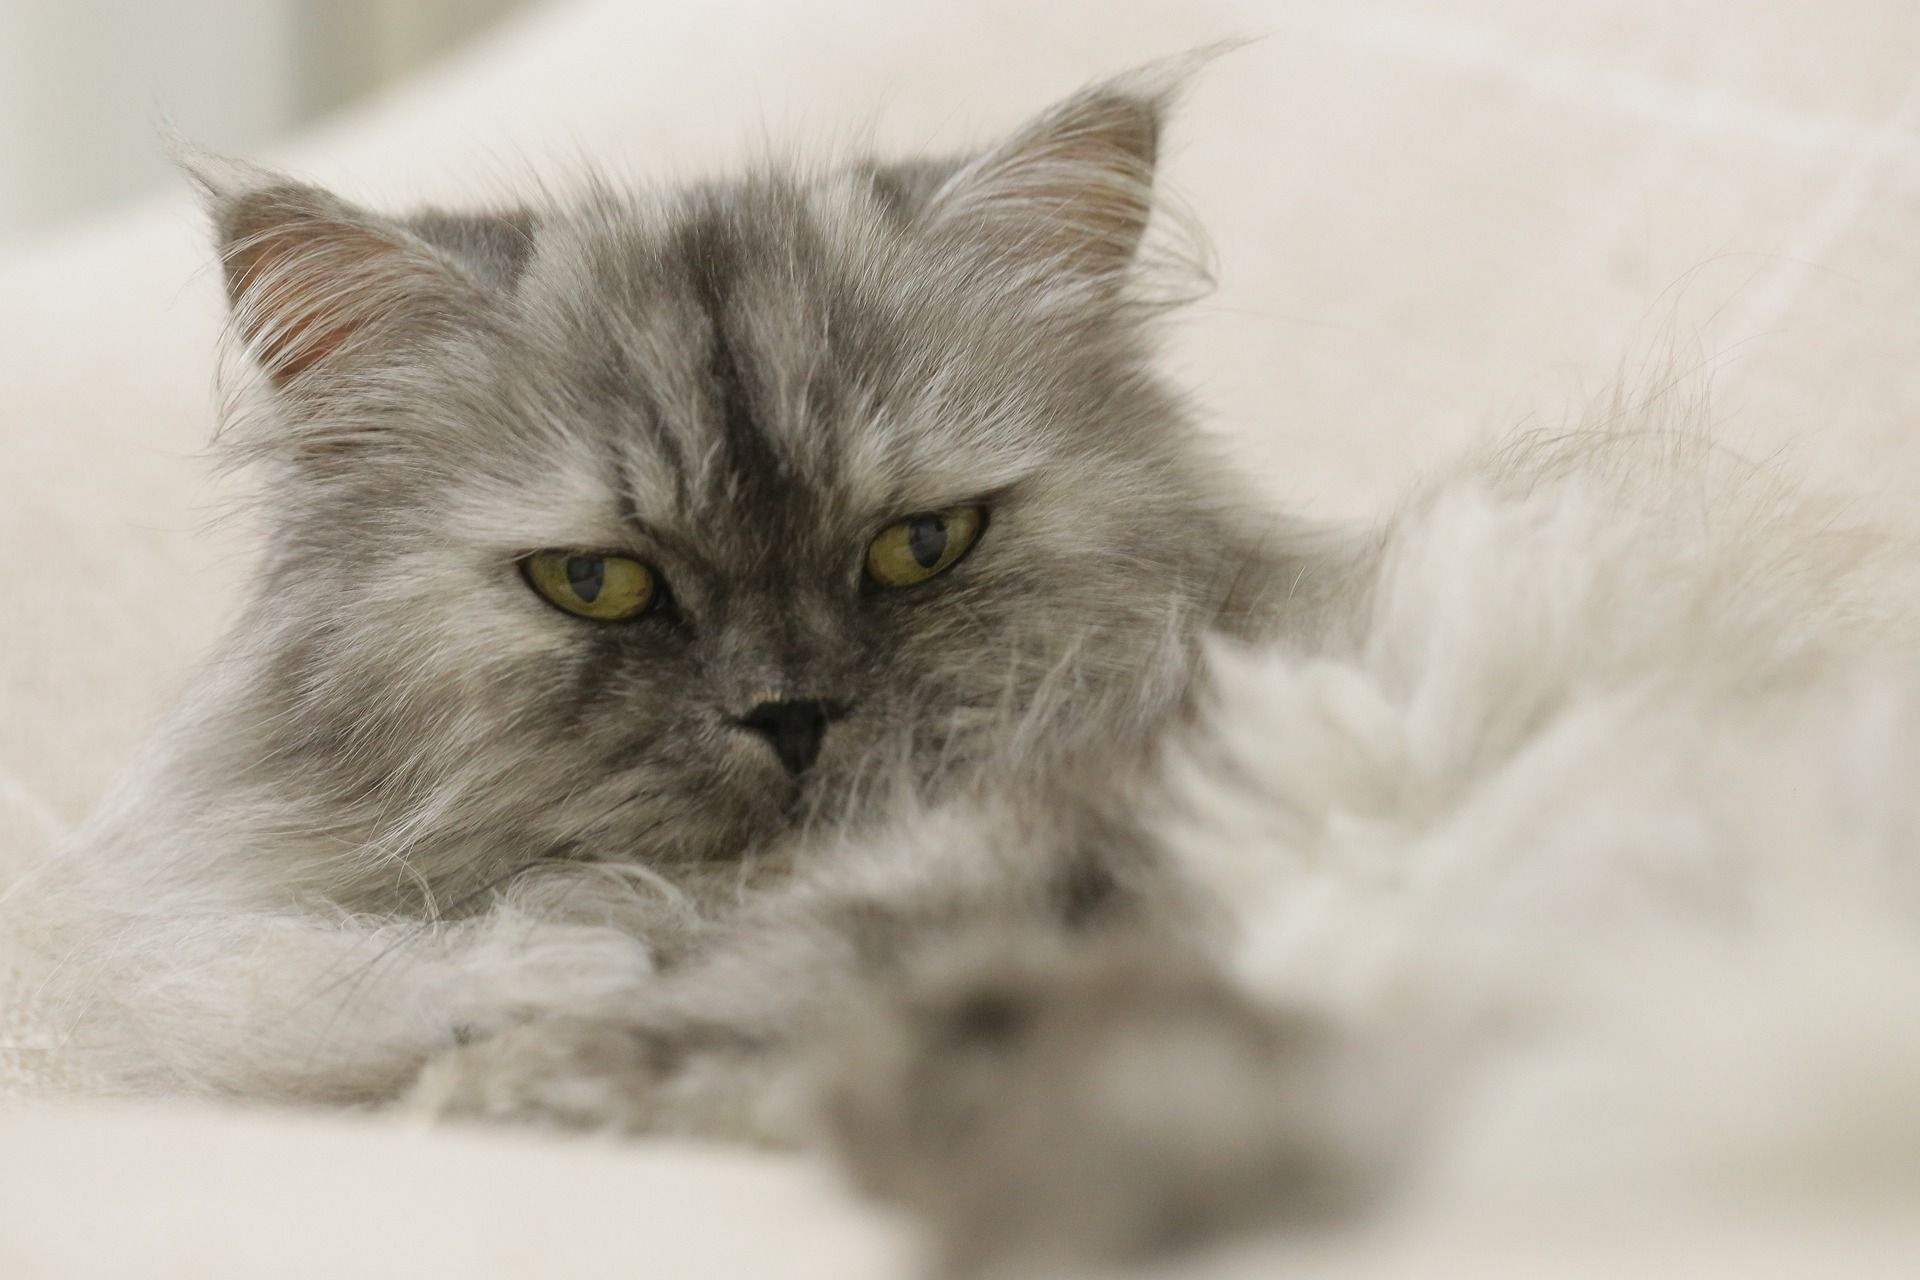 Are Persian cats expensive?